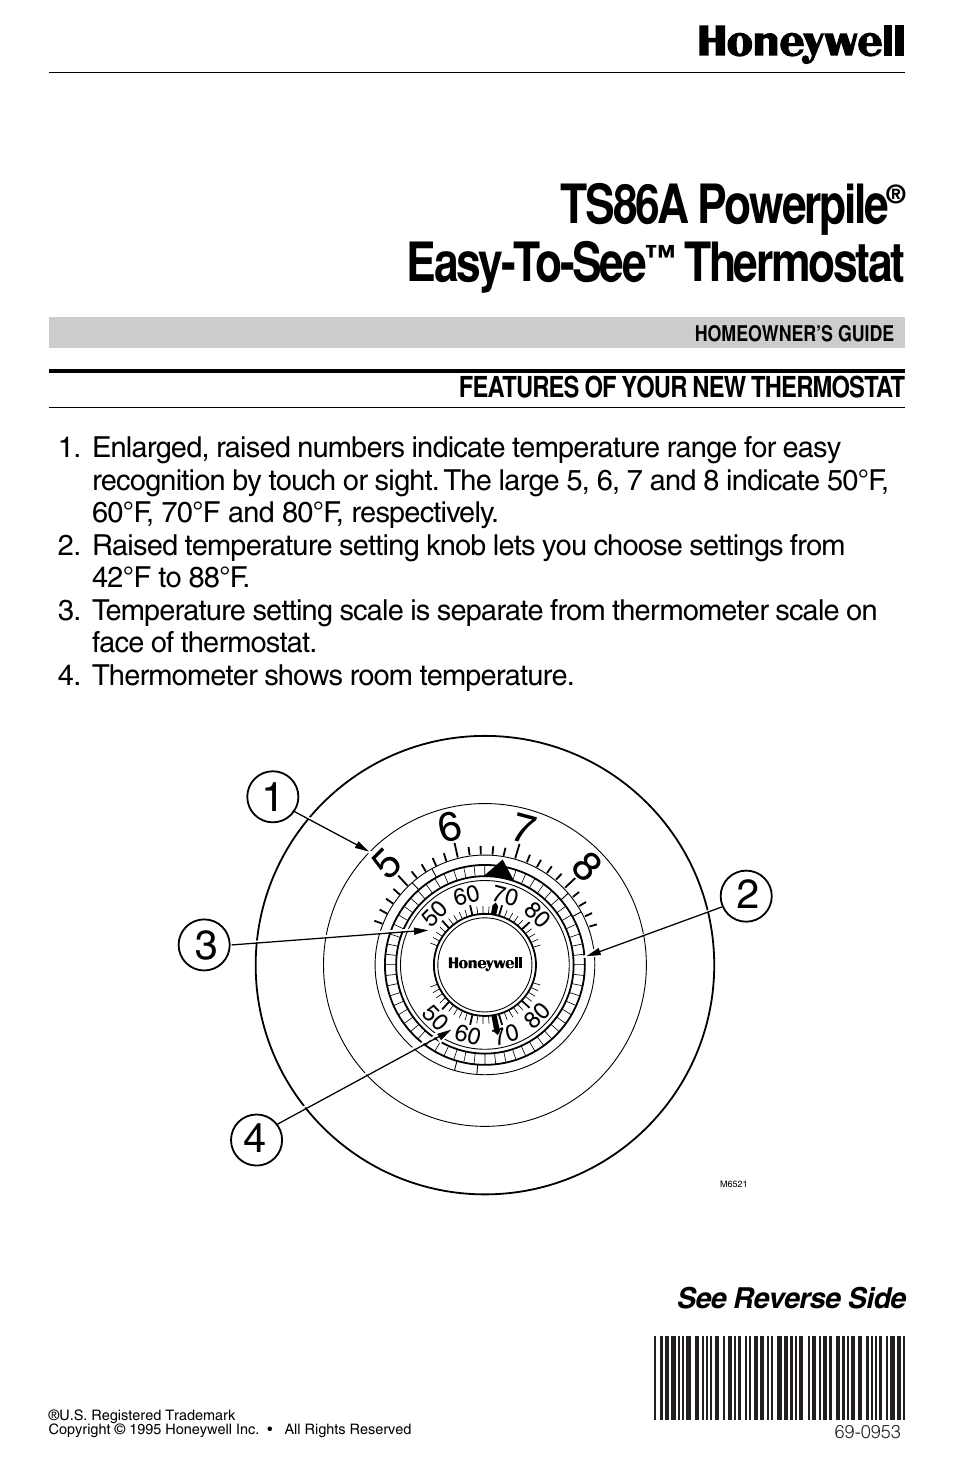 Honeywell POWERPILE TS86A User Manual | 2 pages